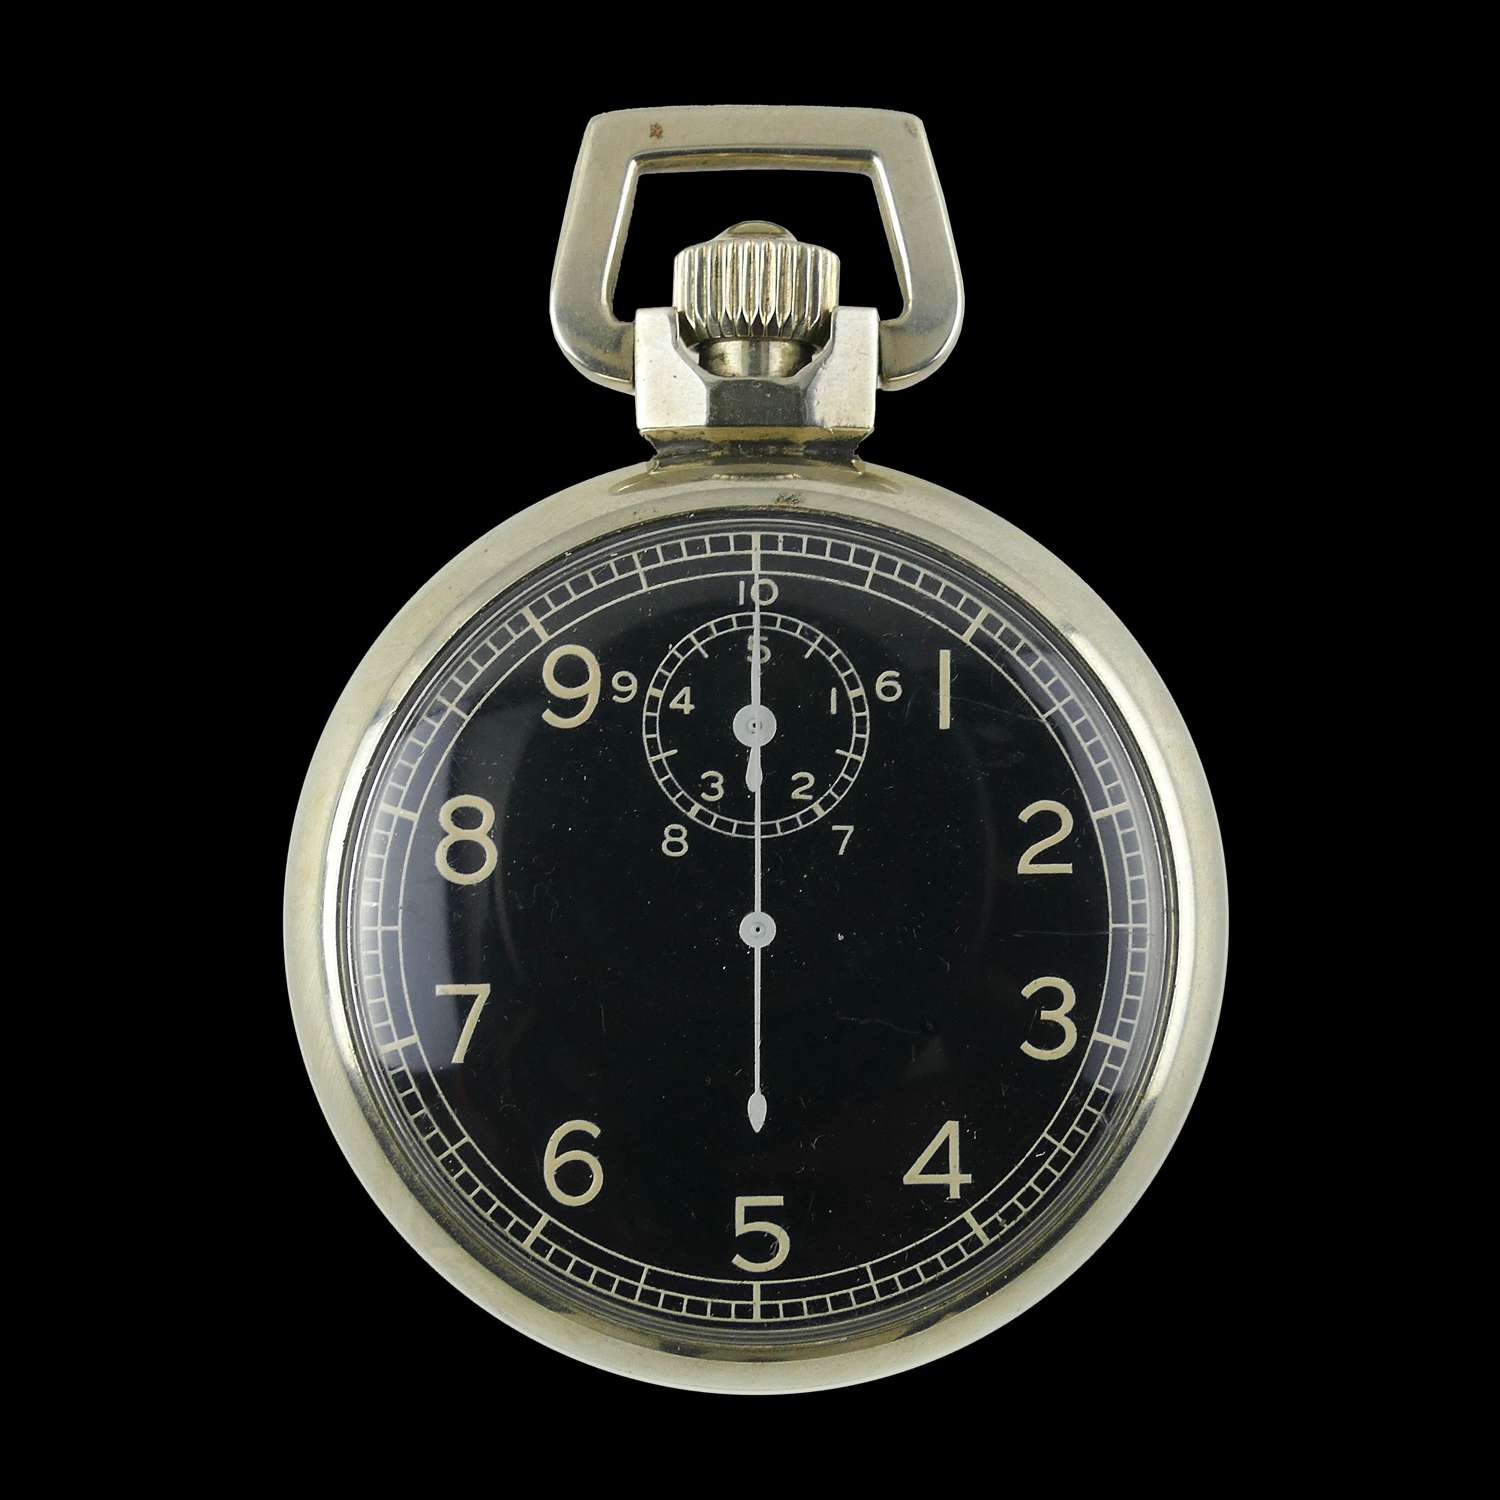 USAAF stopwatch, type A-8